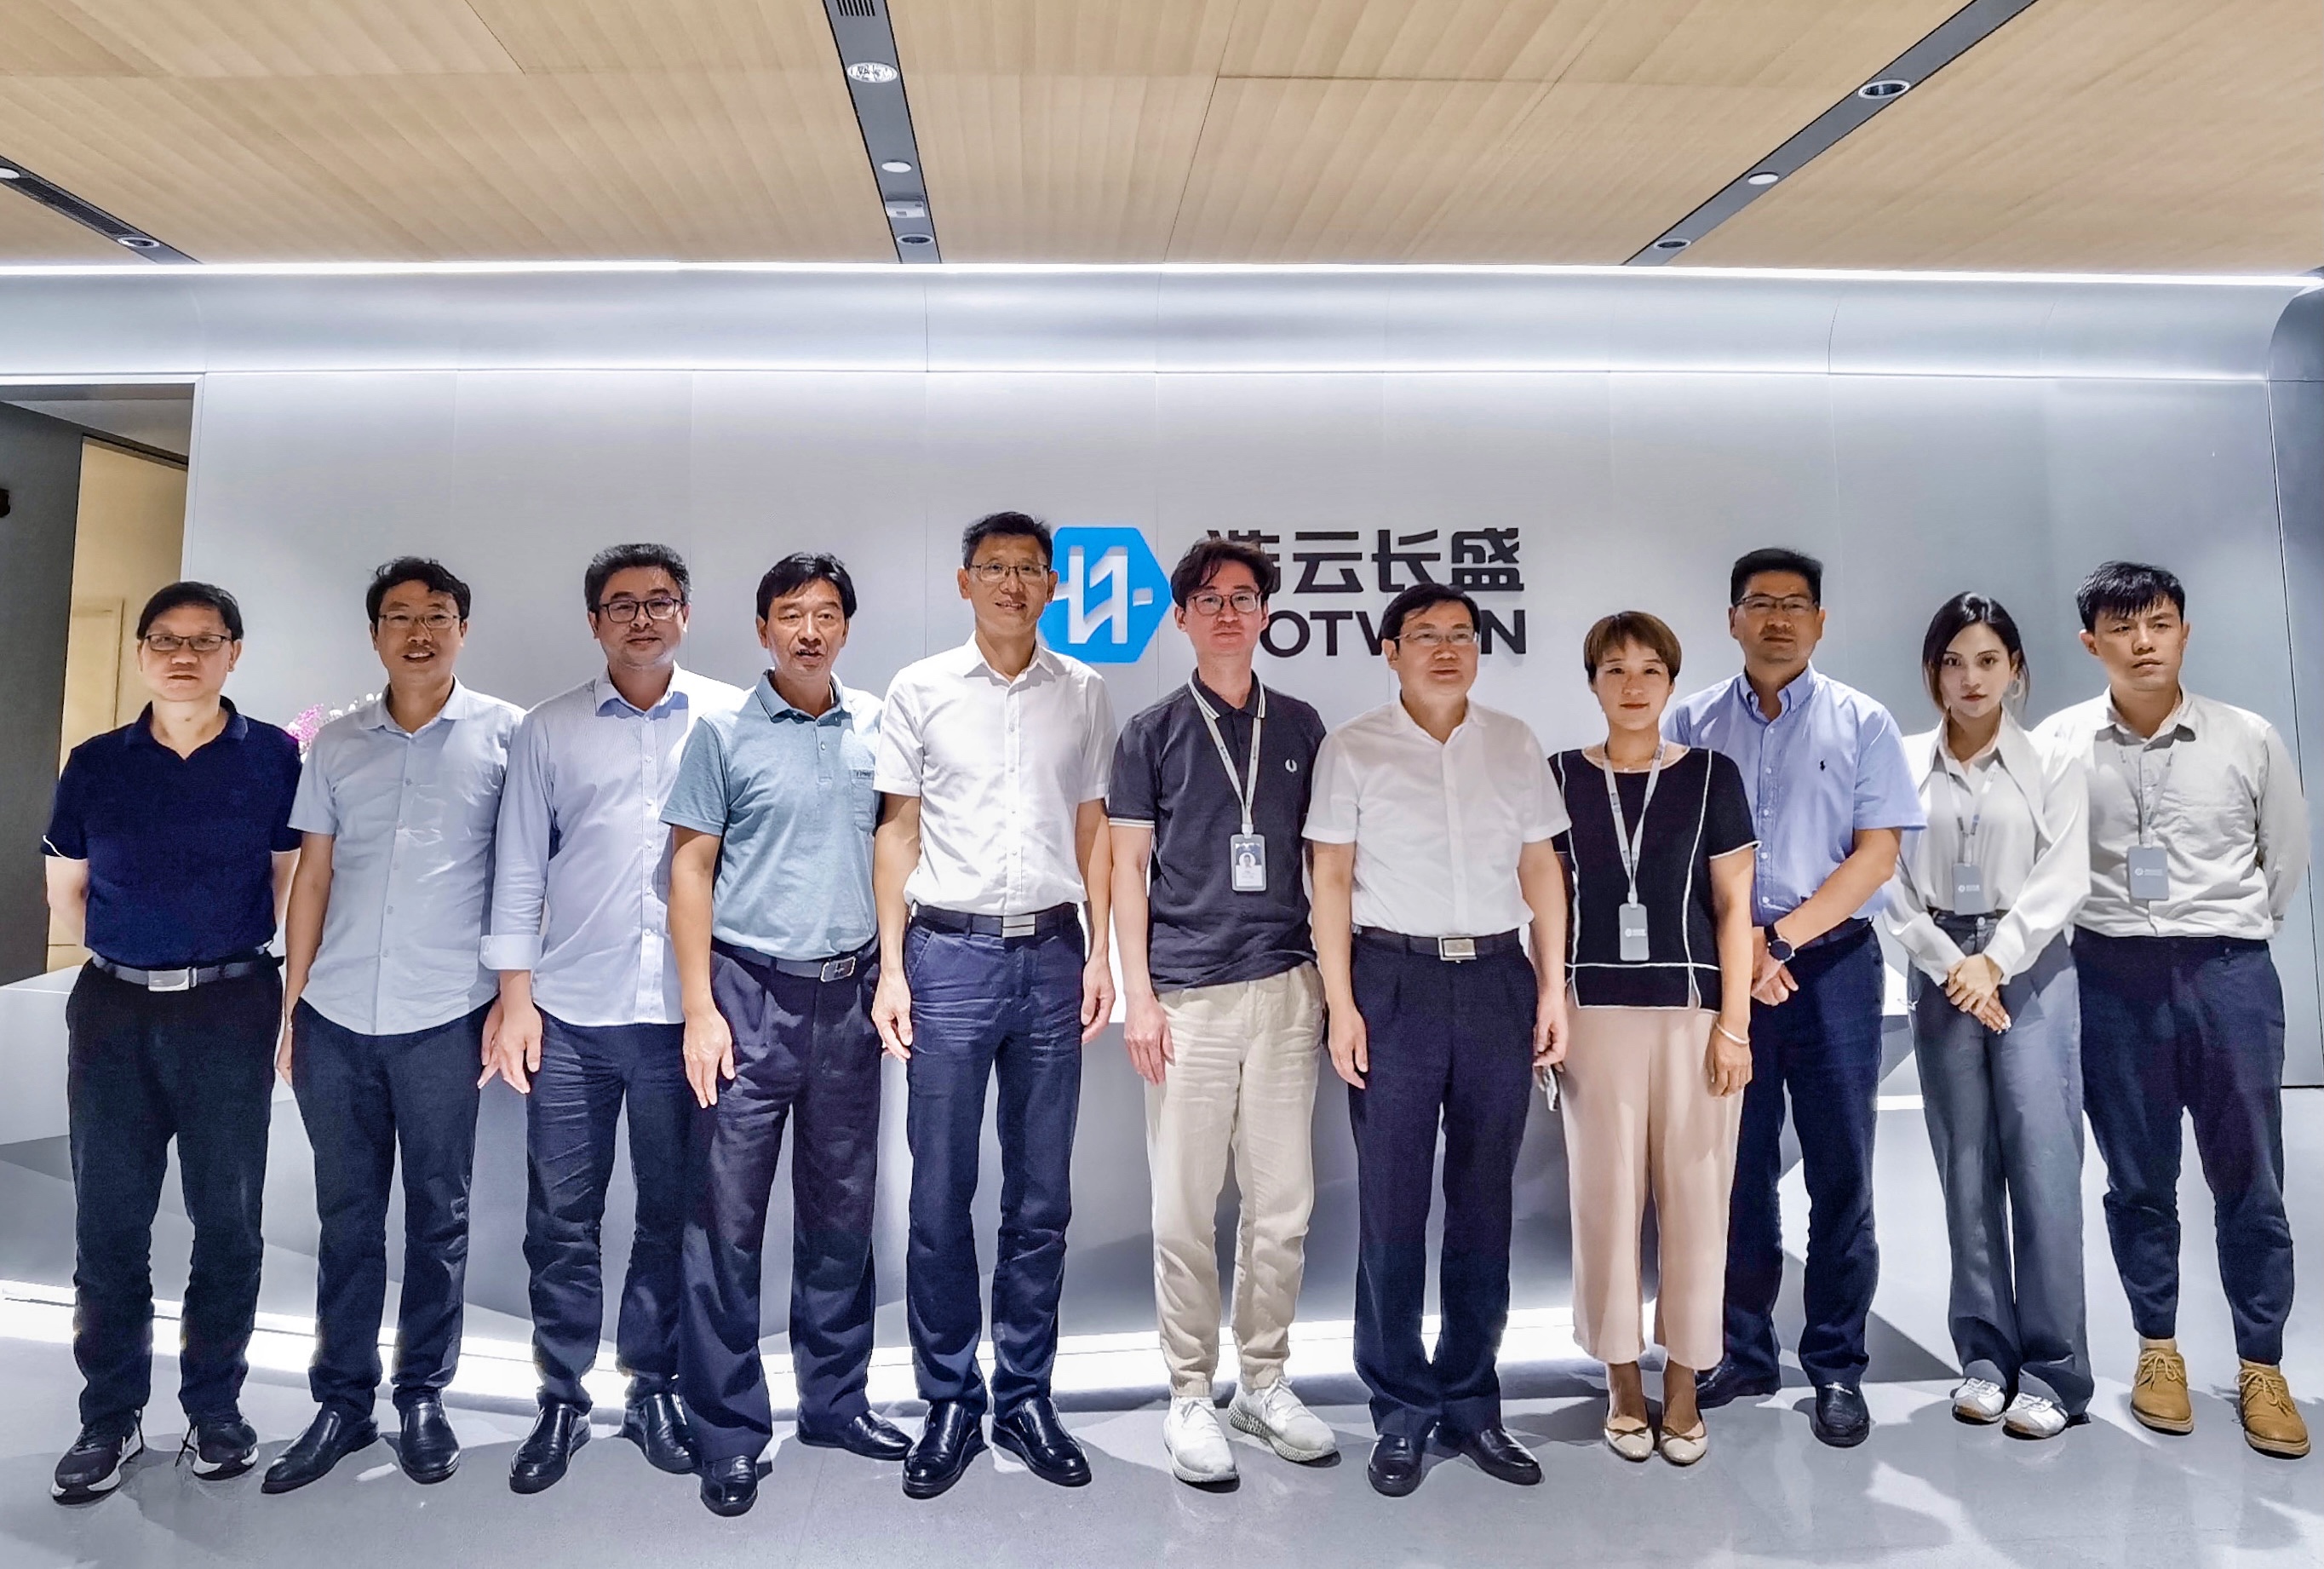 The Standing Committee Member of Huangshan Municipal Party Committee and Executive Deputy Mayor Zhu Ce and his party visited Hotwon for inspection and guidance.